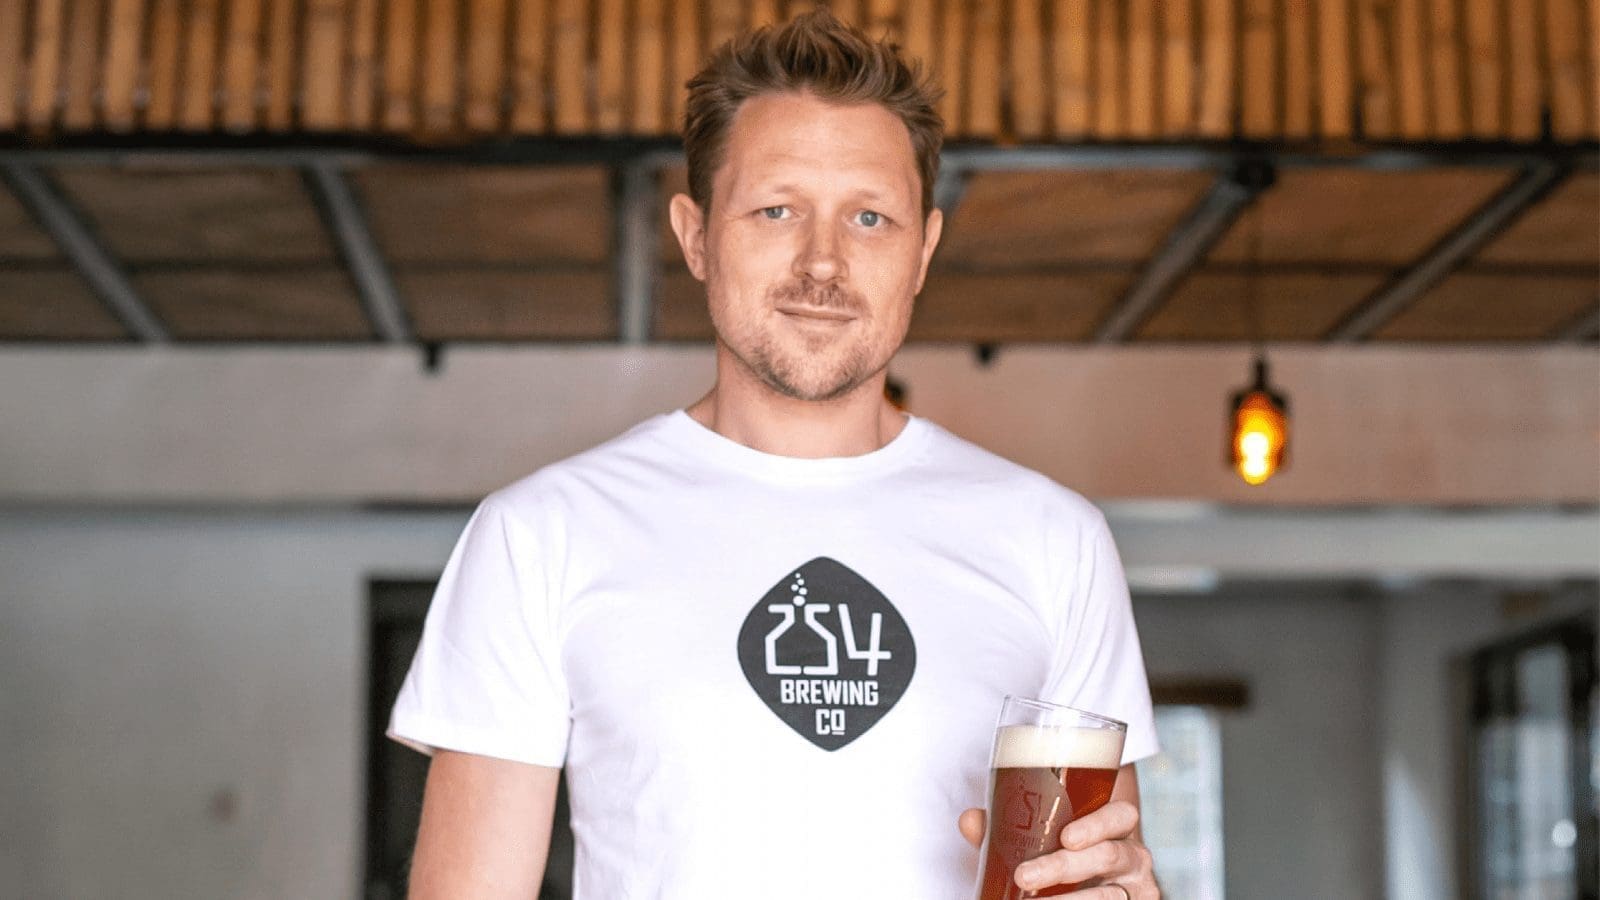 254 Brewing Co: Bold enough to launch a beer business at the height of a pandemic